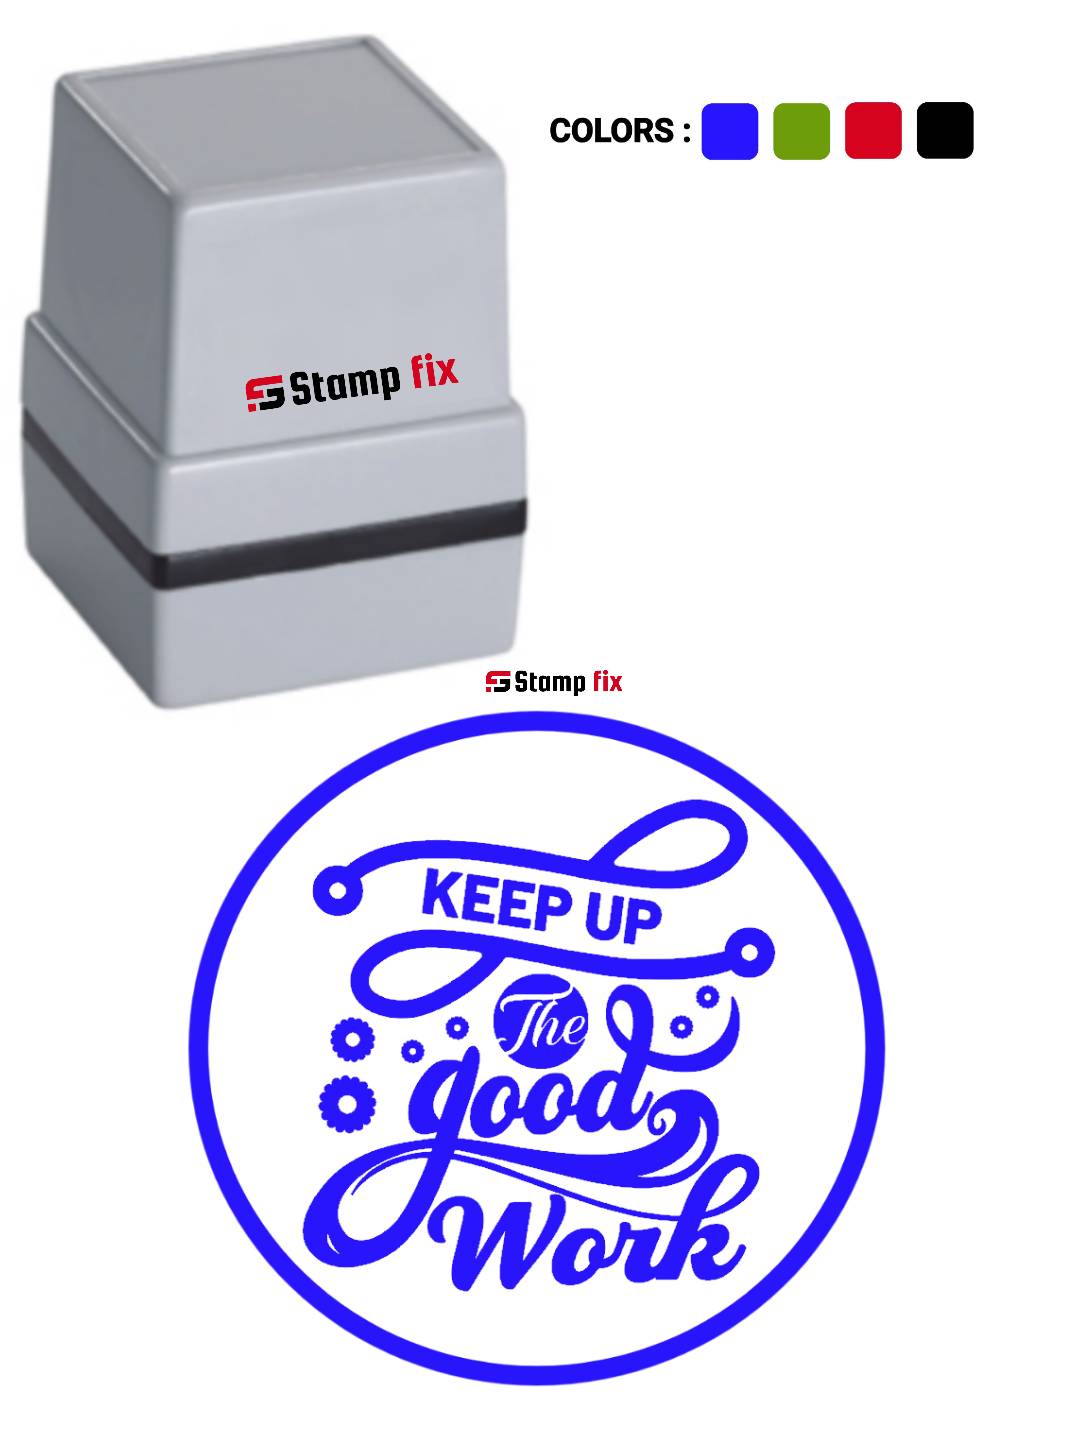 Pre Ink teachers Remarks stamp, tecahers stamp, school stamp, mark stamp, grade stamp, remark stamp , teachers easy stamp, teachers checking stamp, teachers marking stamp, Stamp by StampFix, a self-inking stamp with high-quality impressions
in India, nylon stamp, rubber stamp, pre ink stamp, polymer stamp, urgent stamp